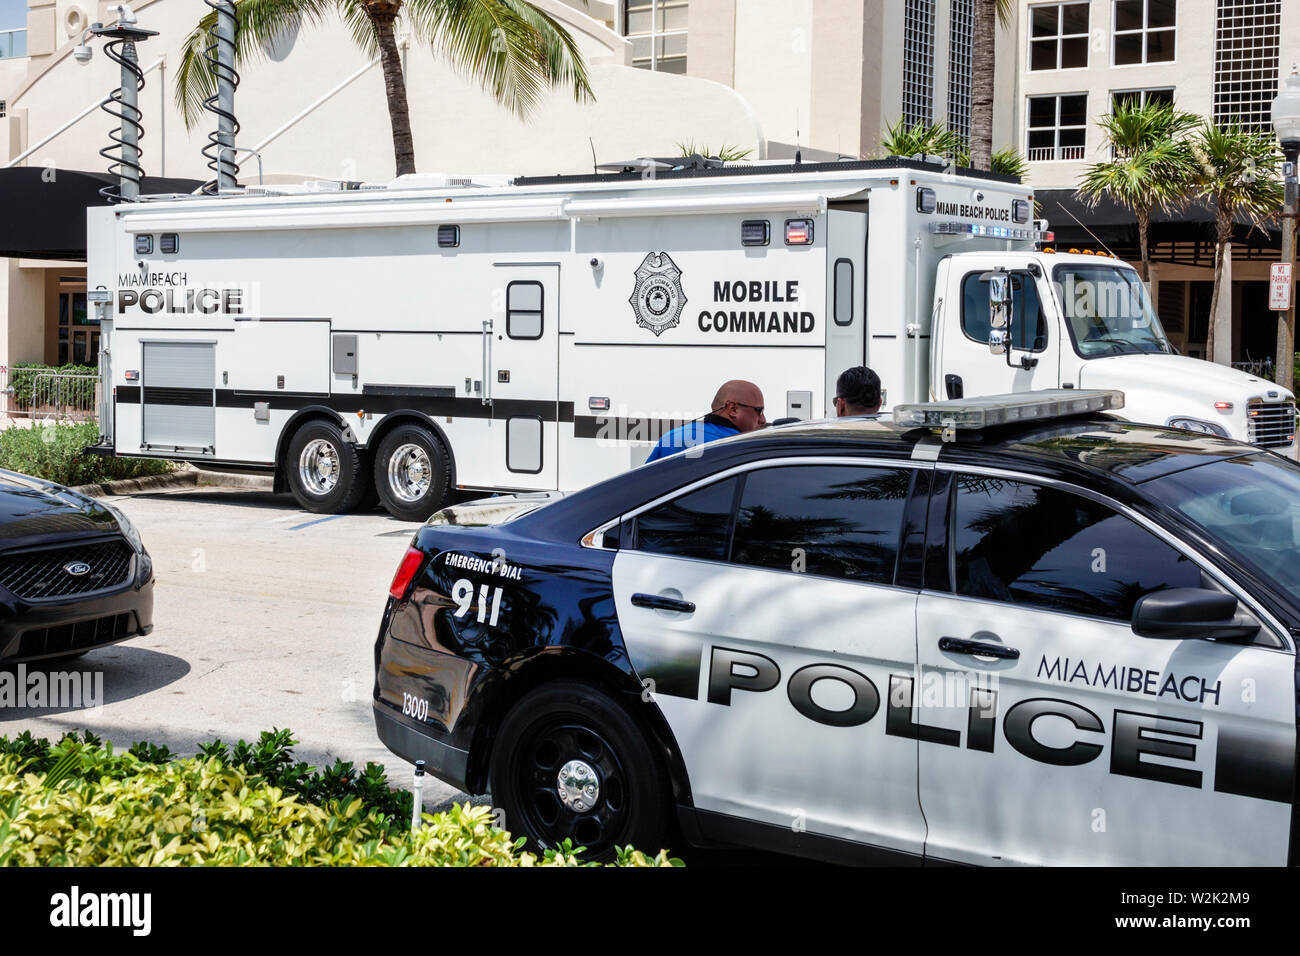 Miami Beach Florida,North Beach,Fire on the Fourth Festival July 4th annual police presence,car cars,Mobile Command vehicle,FL190704029 Stock Photo